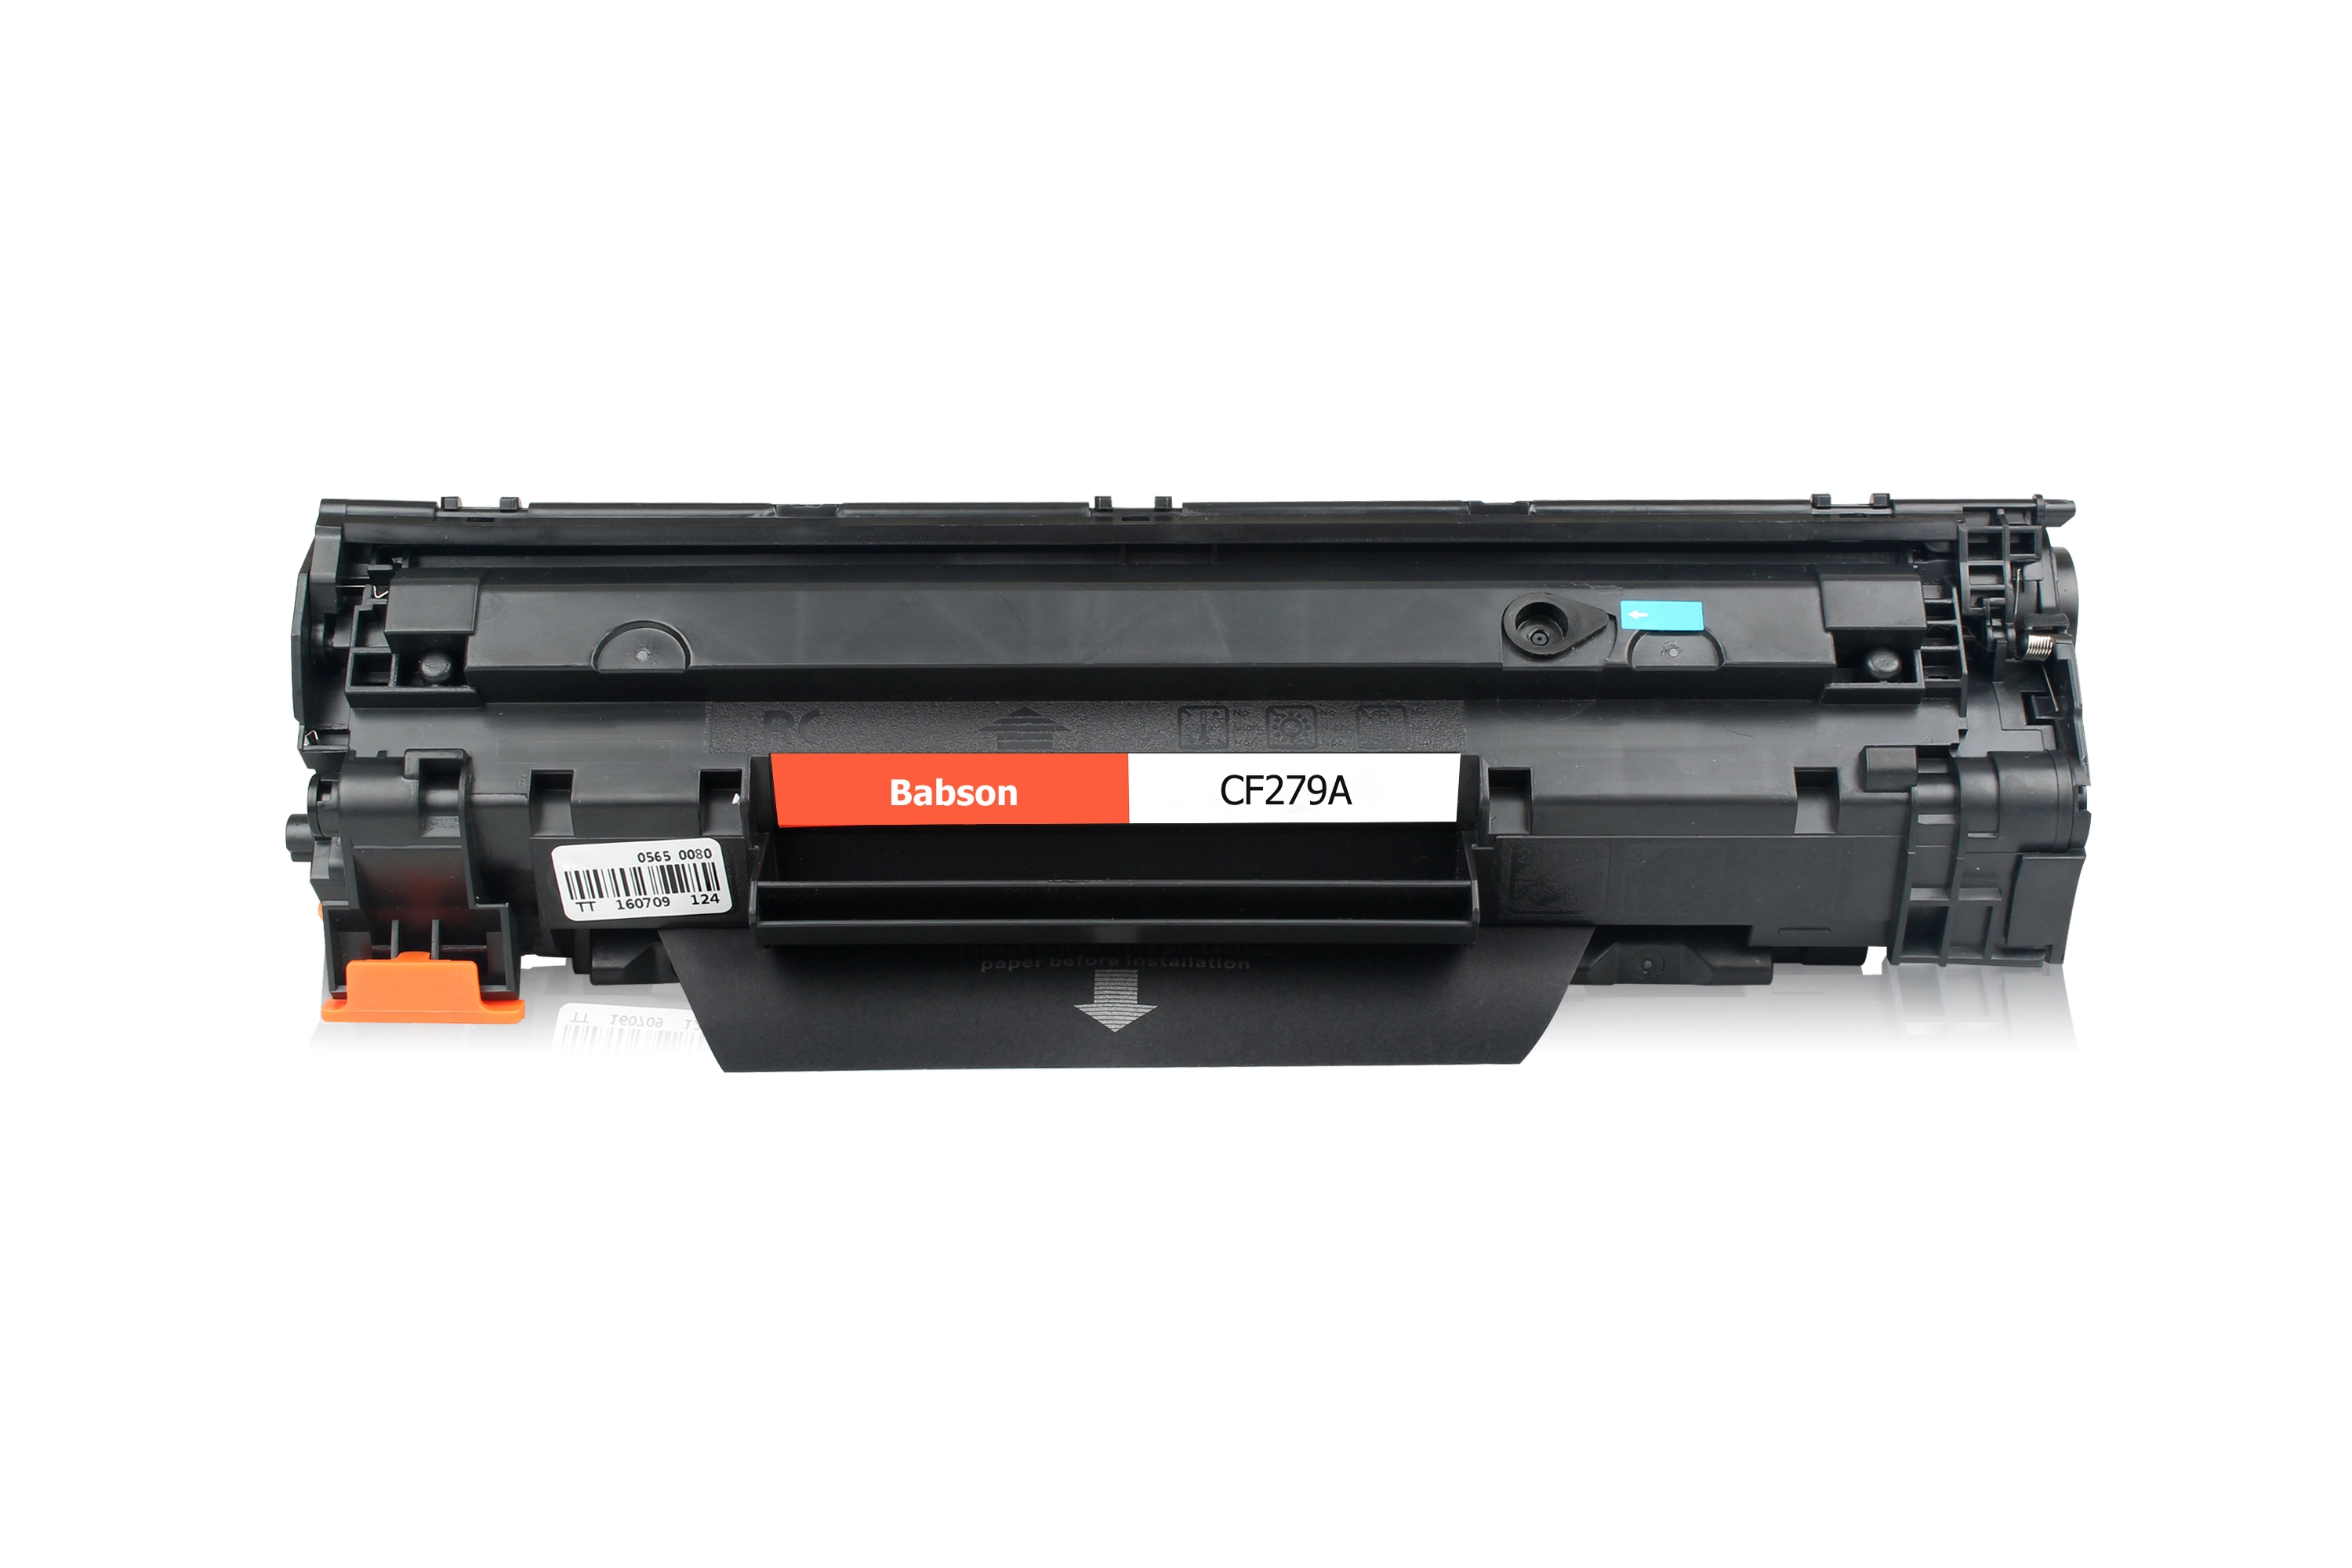 Cartucho de toner CF279A Use para M12W M26NW M26A M12A M12a M12w M26a M26nw